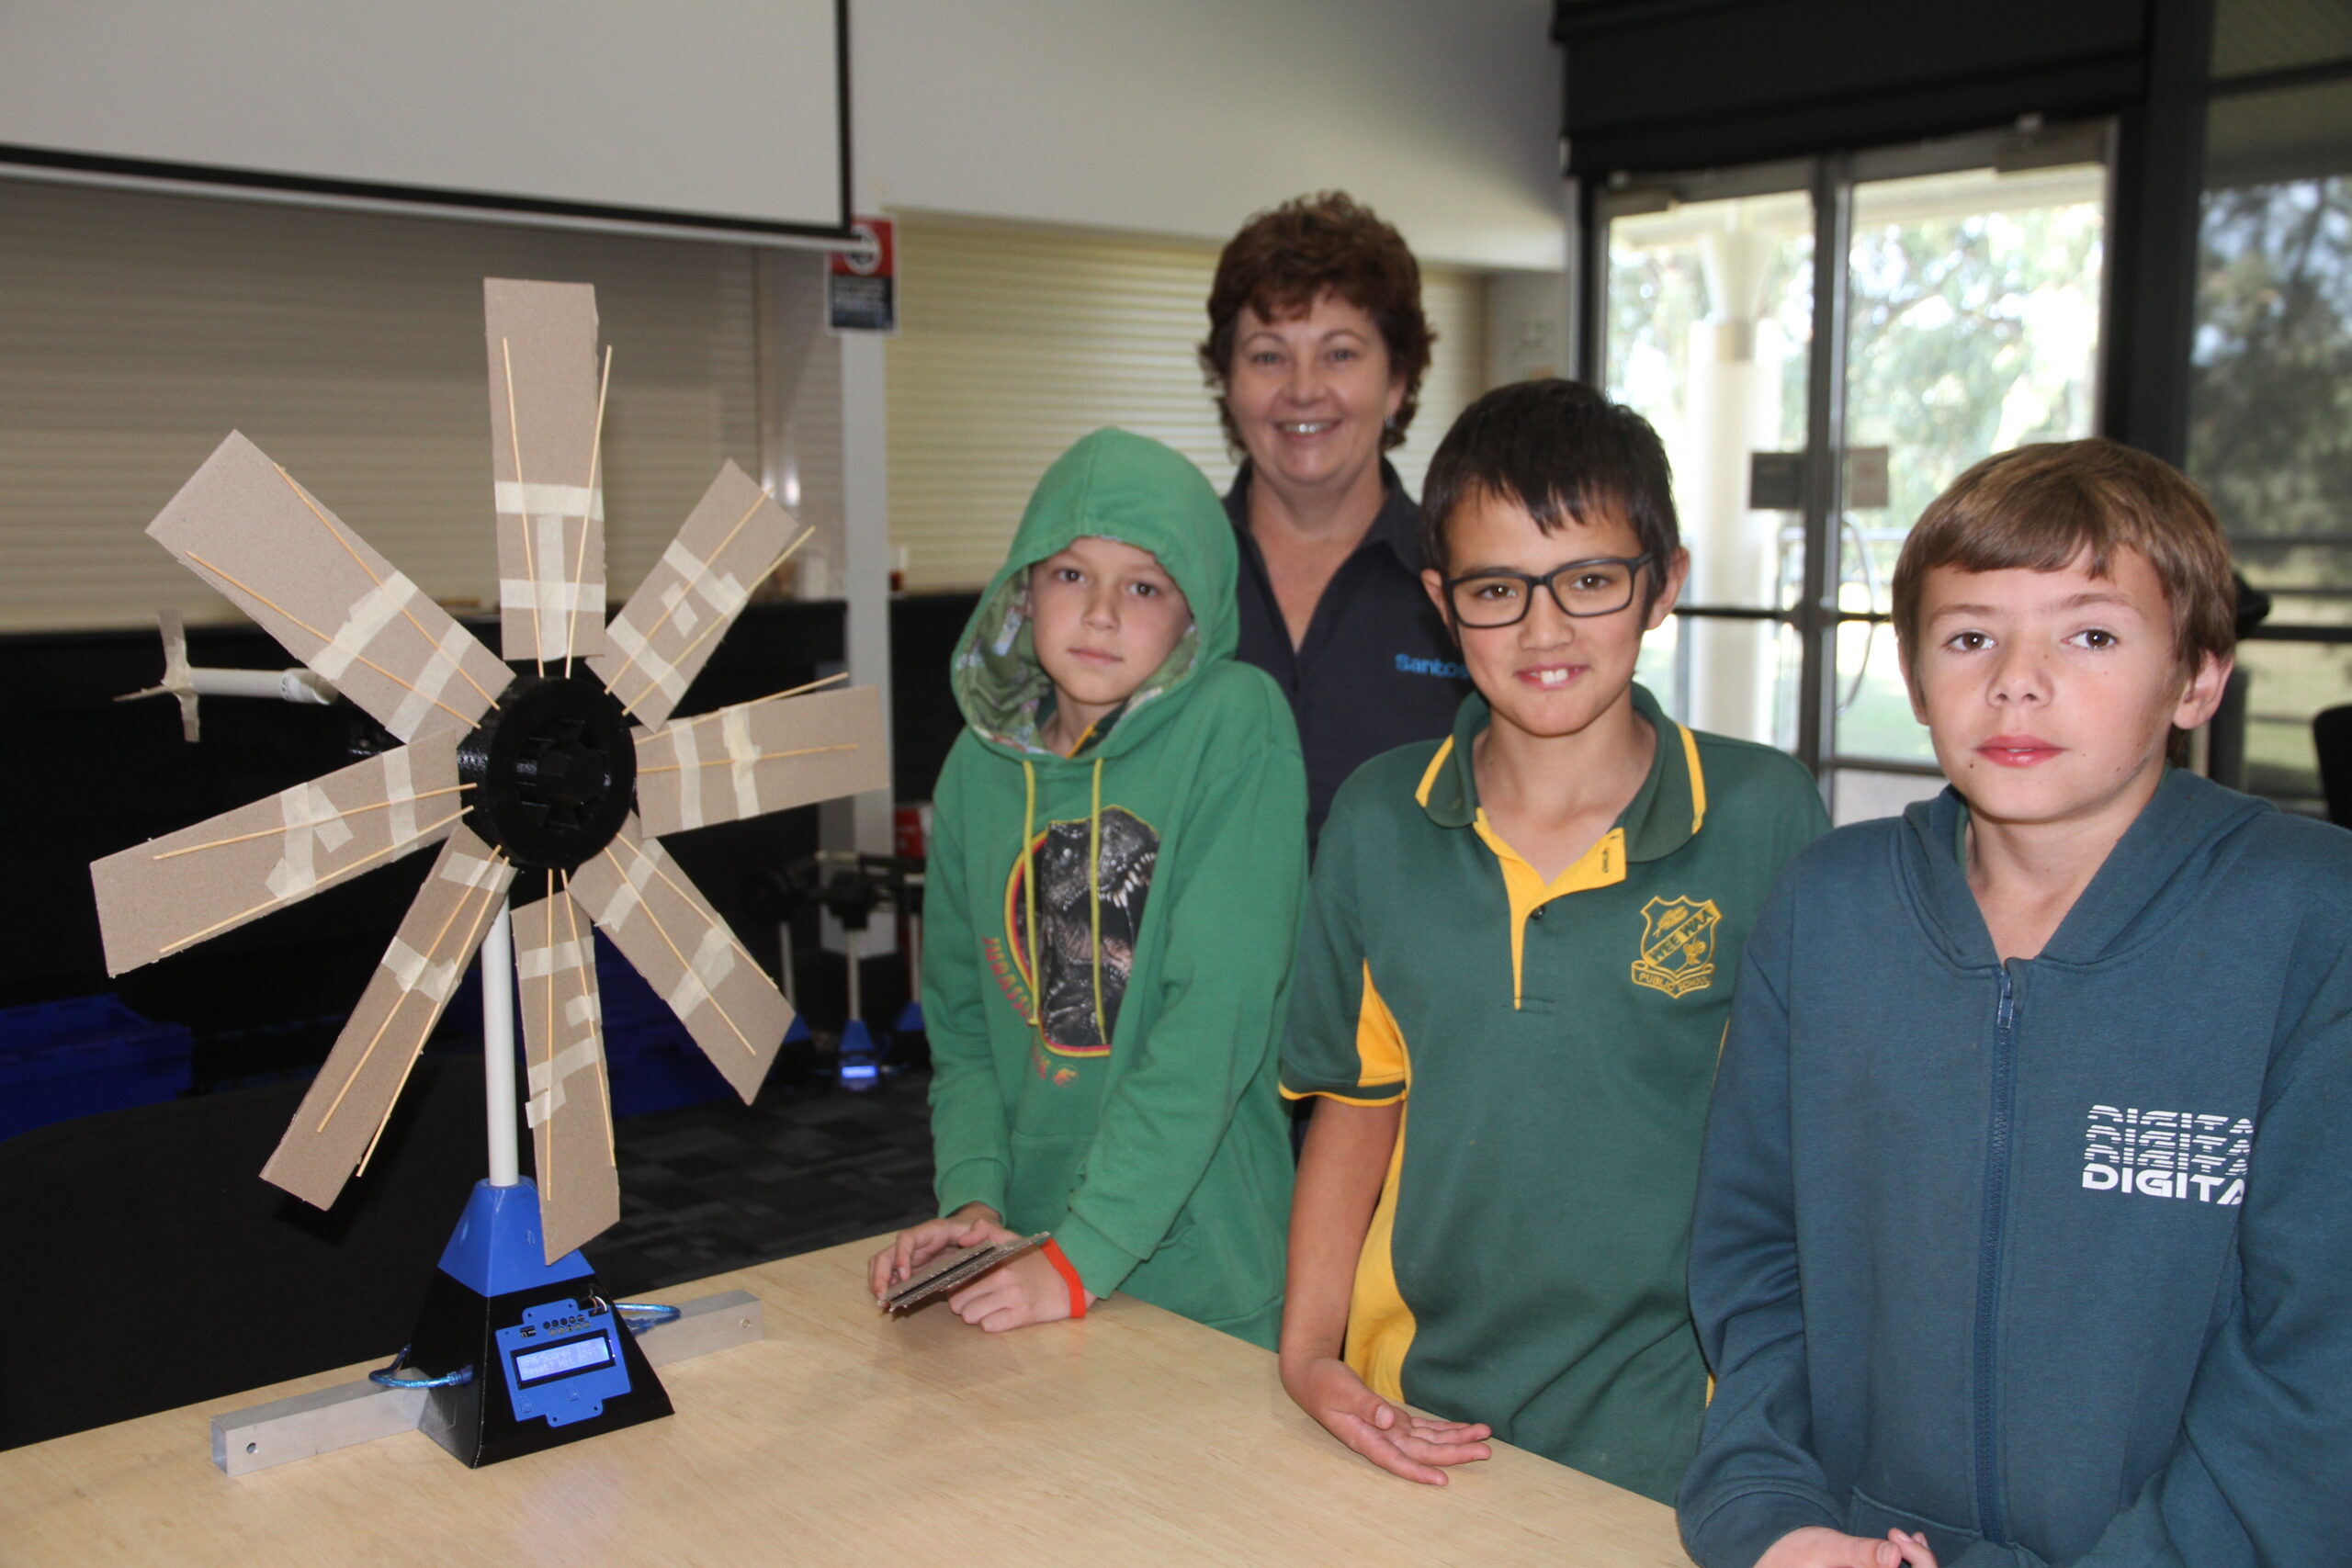 Narrabri Rotary’s annual Science and Engineering Challenge sees 500 students participate